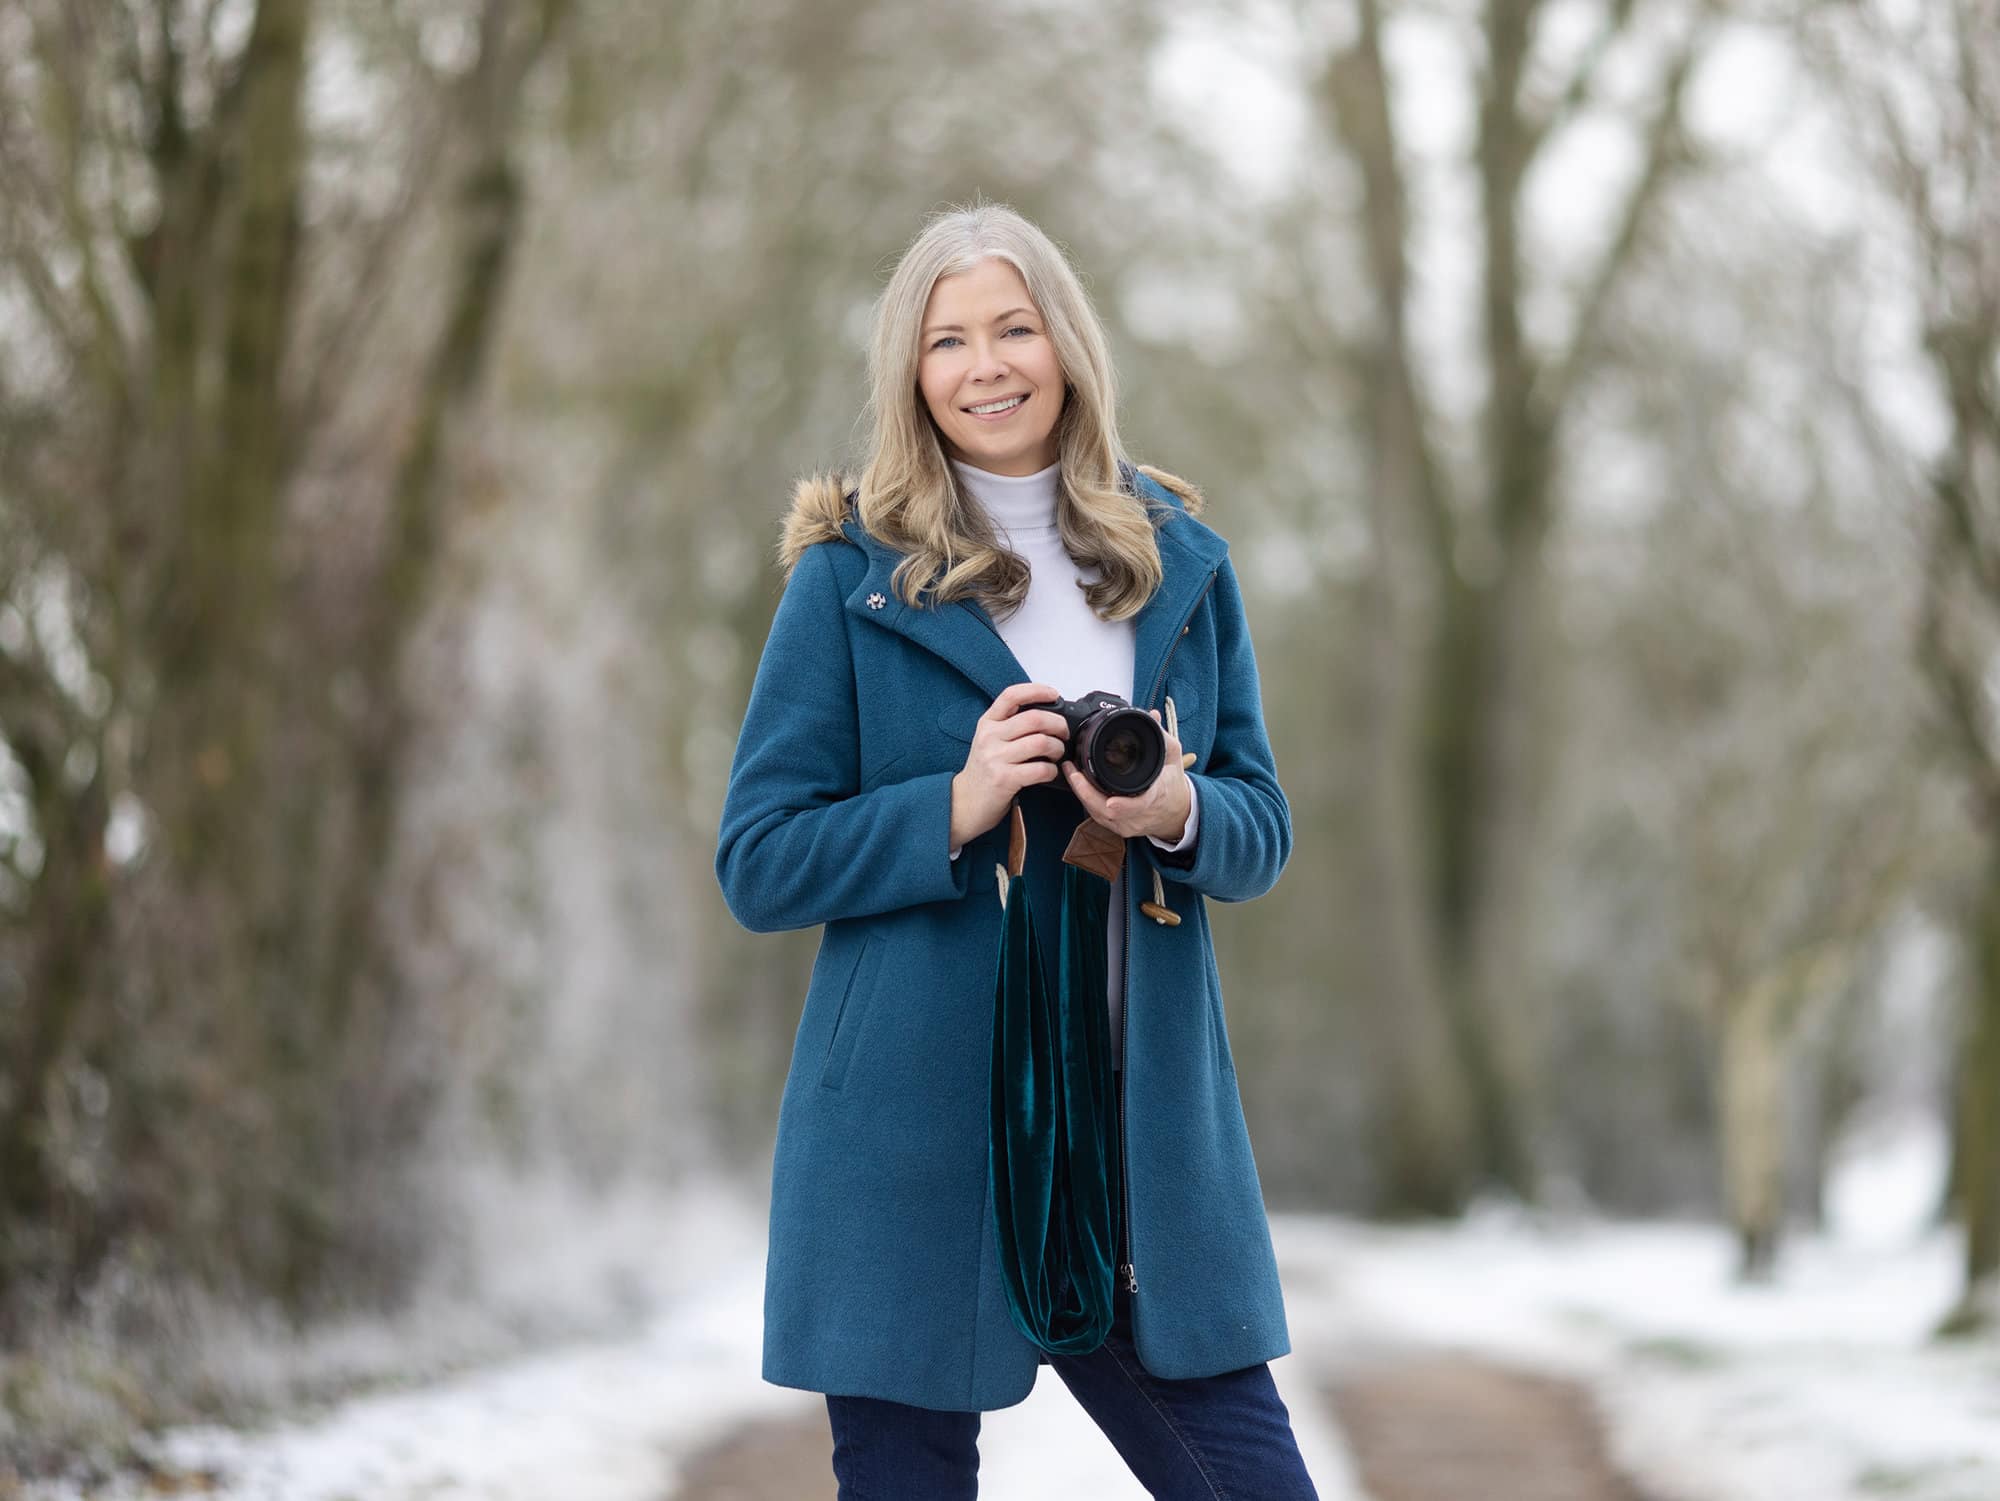 Award winning Portrait PHotographer Alison McKenny stands in the snow with her camera in her hands wearing a teal coat